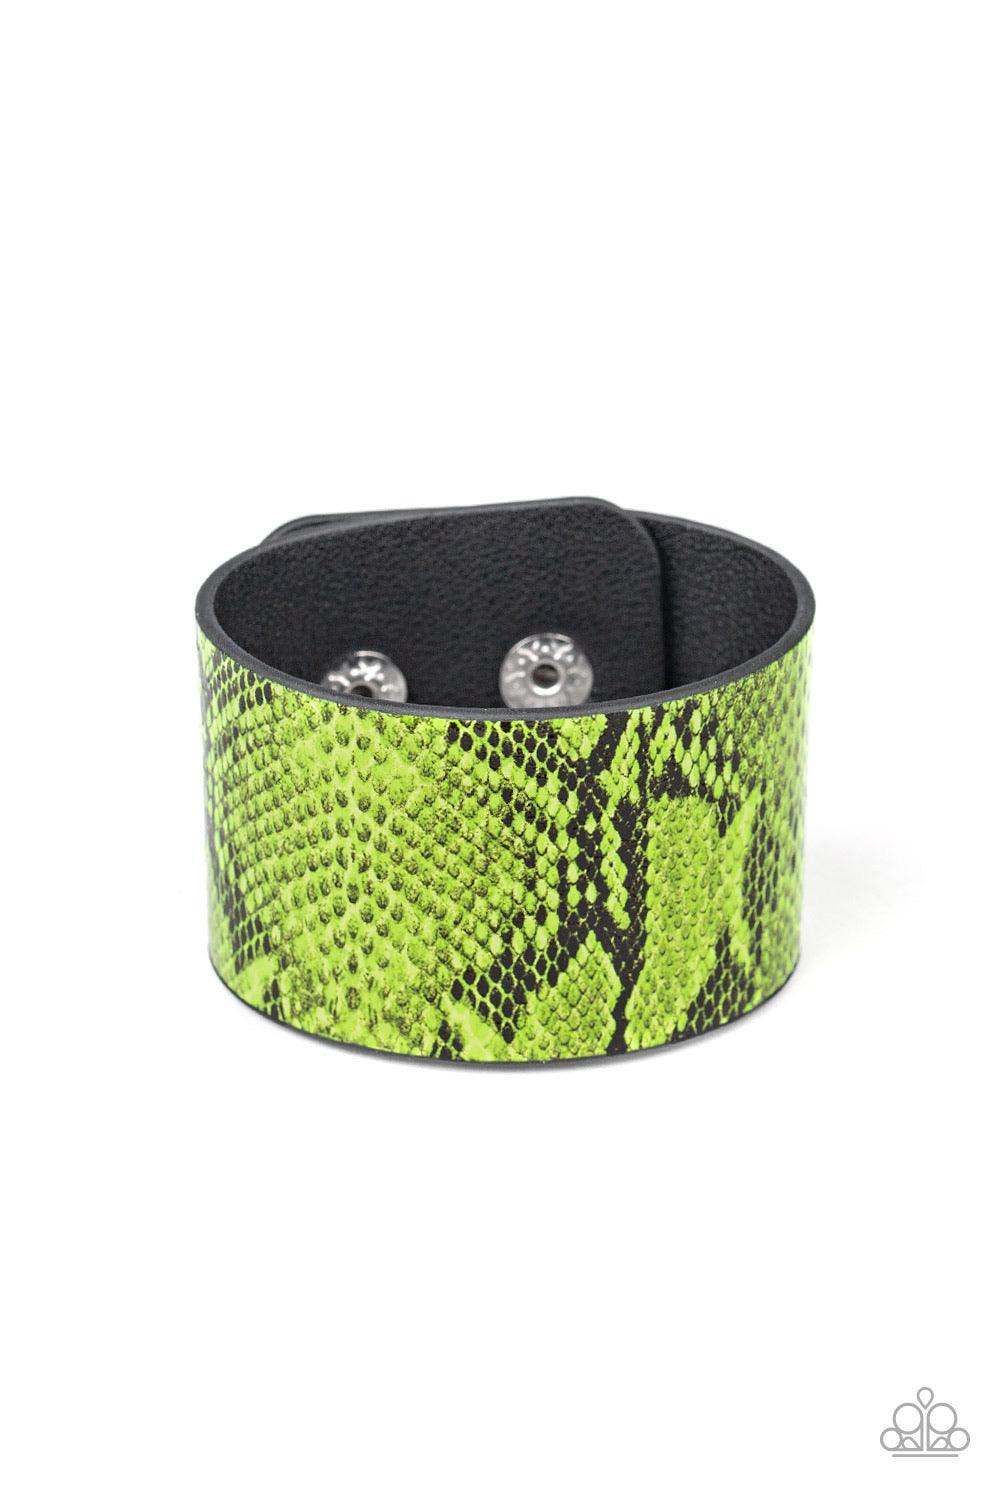 Paparazzi Accessories It’s a Jungle Out There - Green Featuring neon green python print, a thick leather band wraps around the wrist for a colorfully wild look. Features an adjustable snap closure. Jewelry